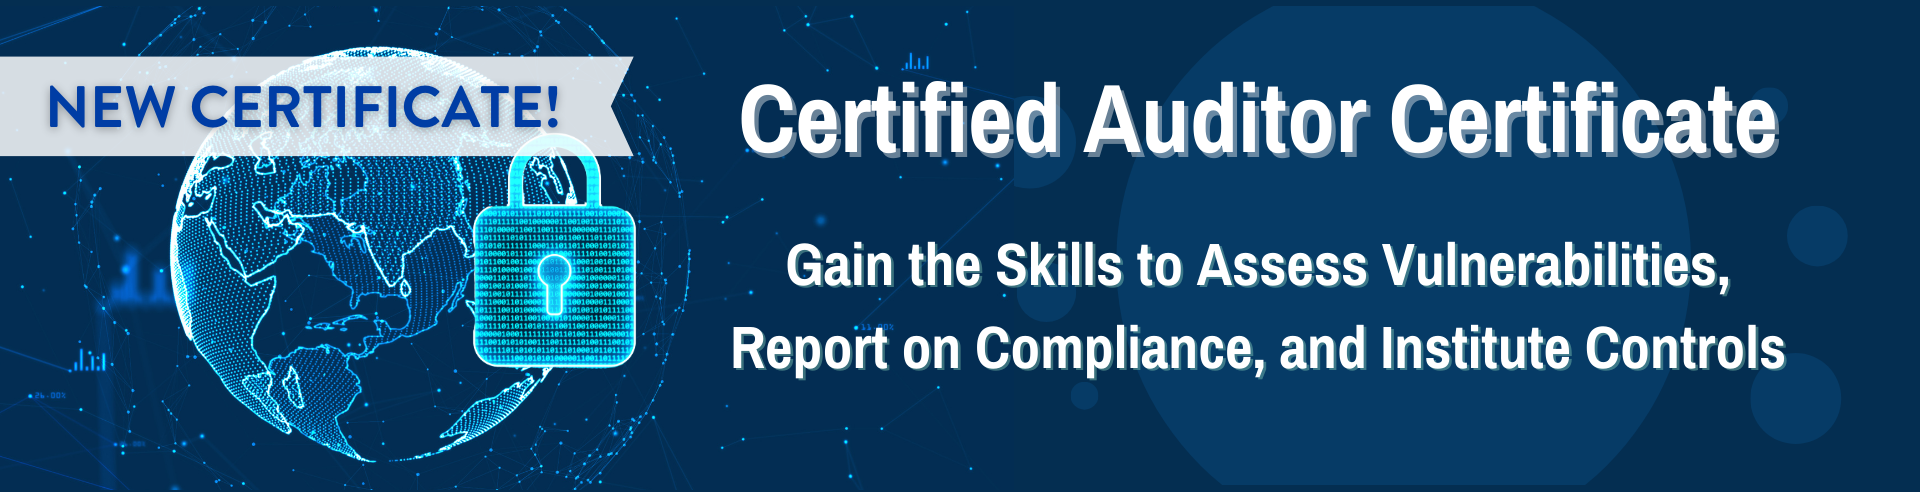 certified auditor